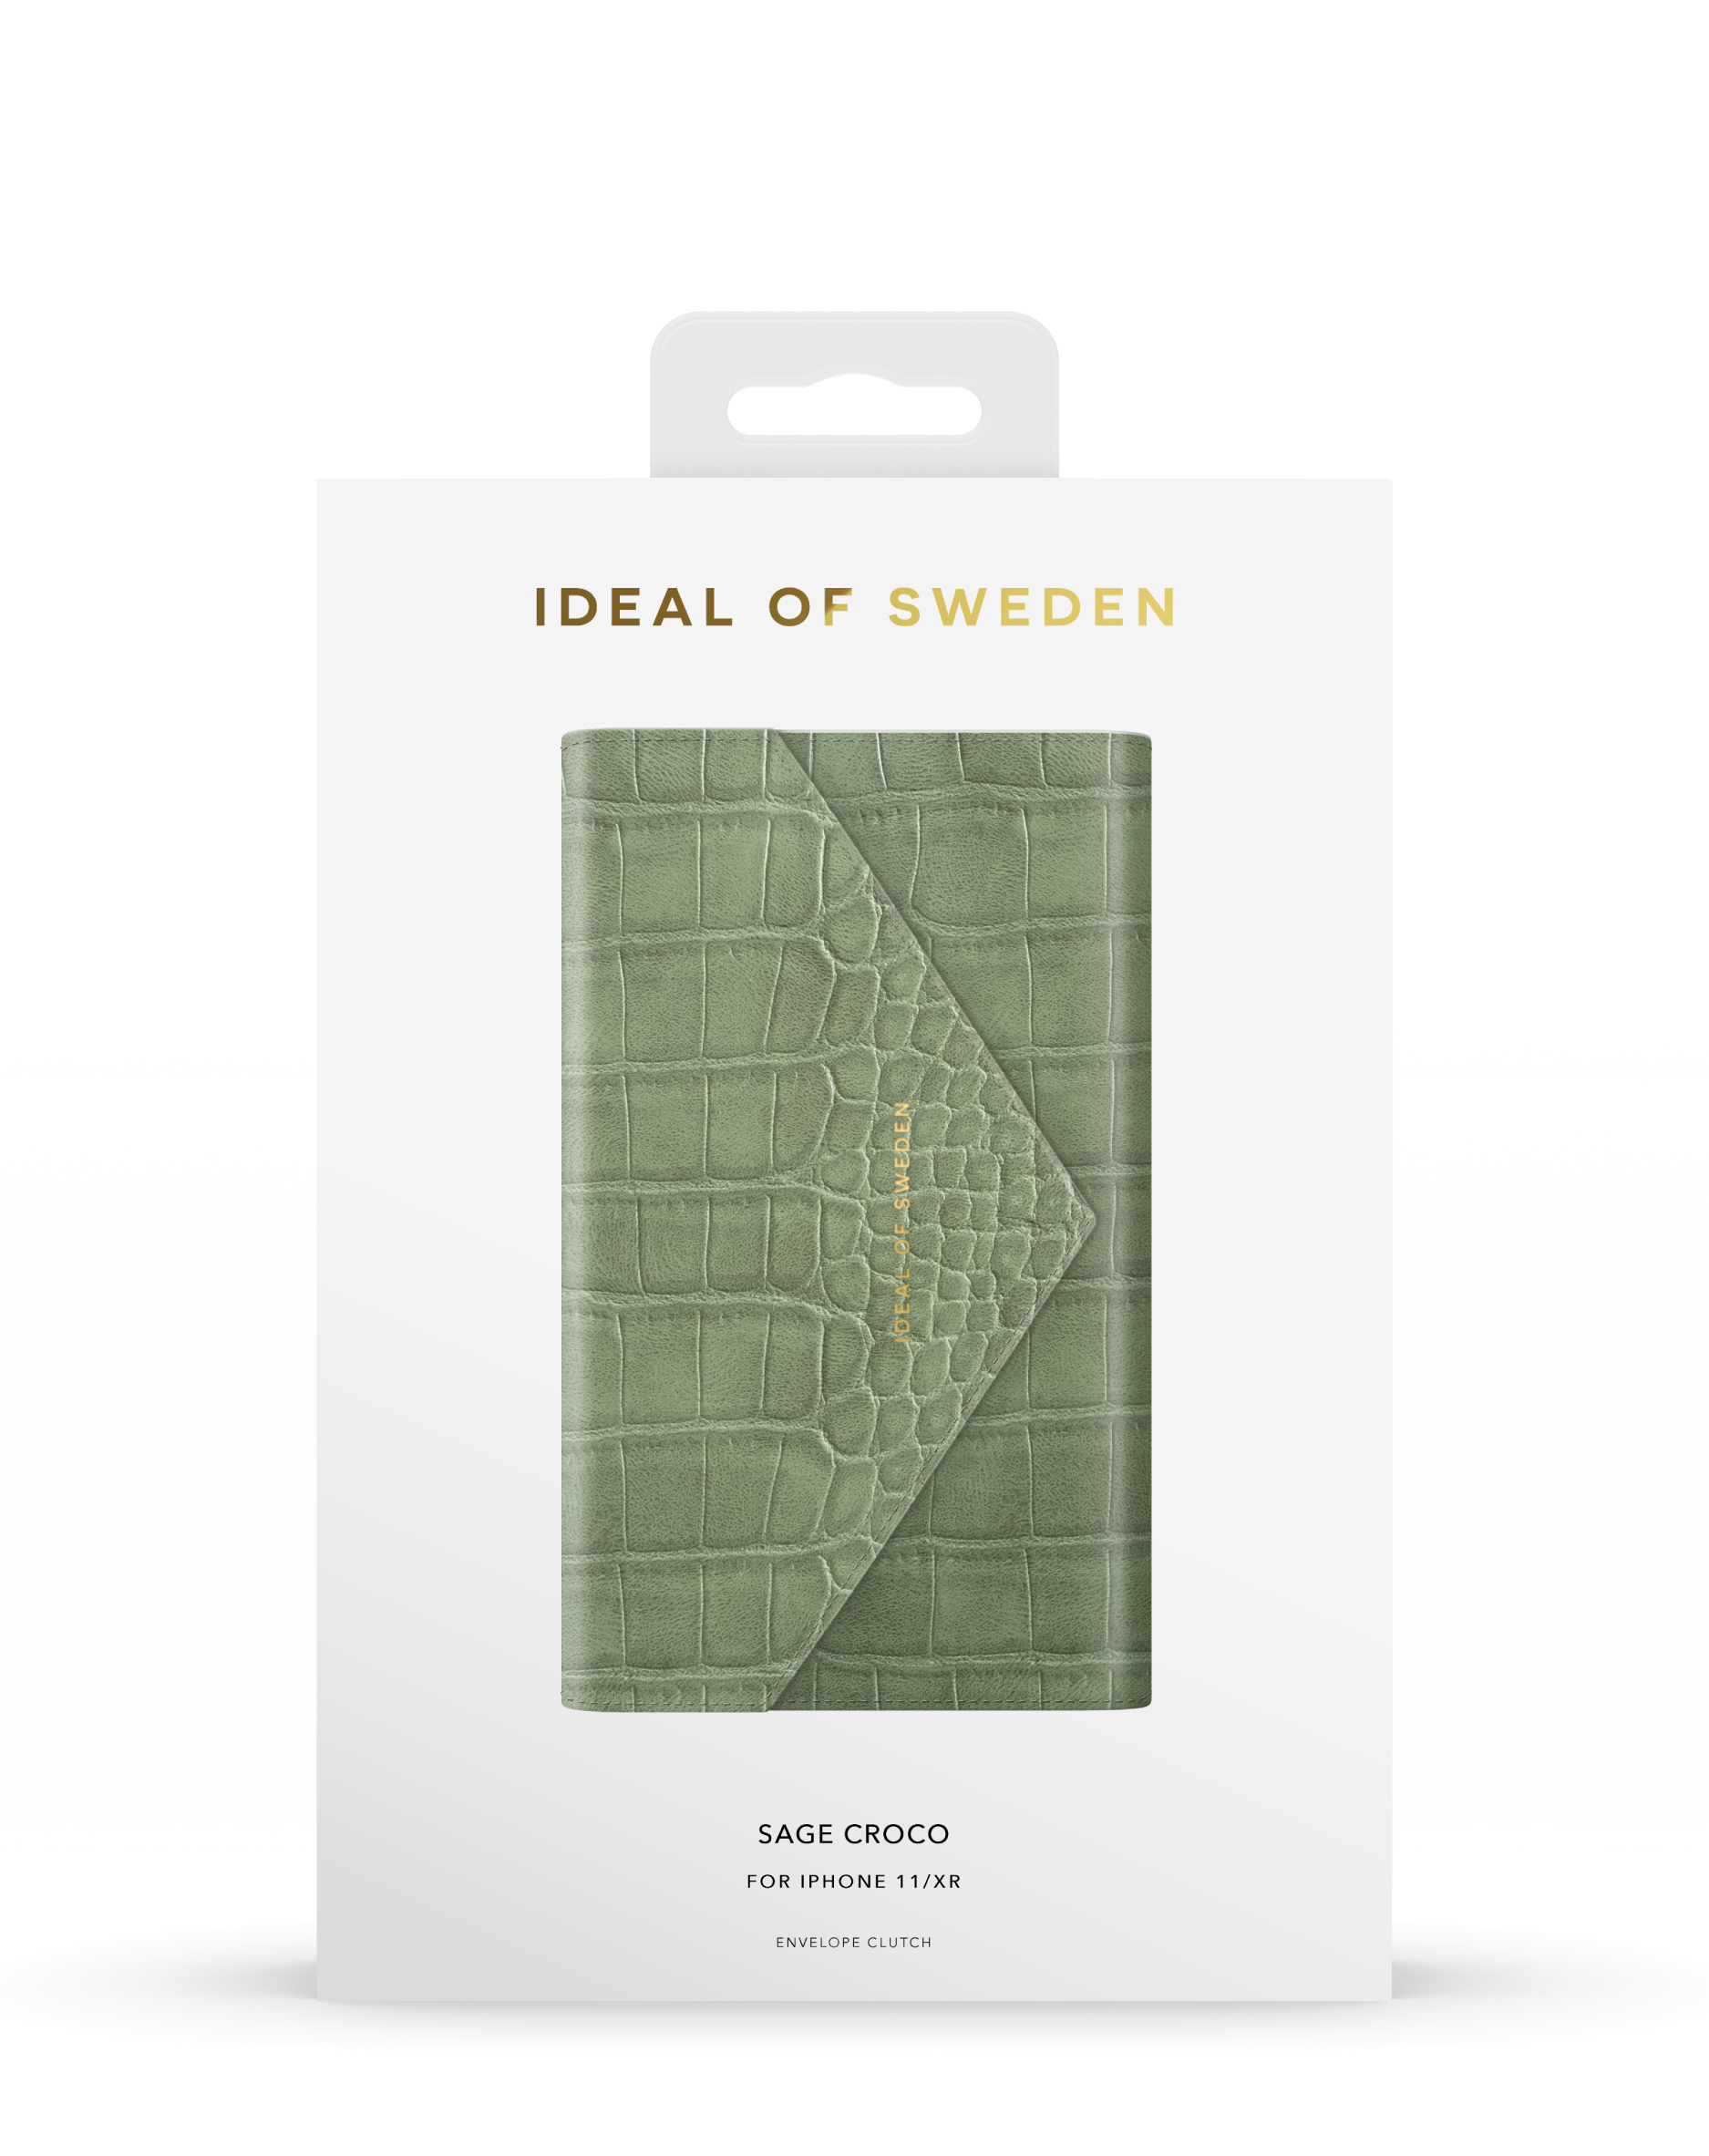 XR, IDECSS20-I1961-210, OF Croco Apple SWEDEN iPhone IDEAL 11, Apple Sage Bookcover, Apple, iPhone